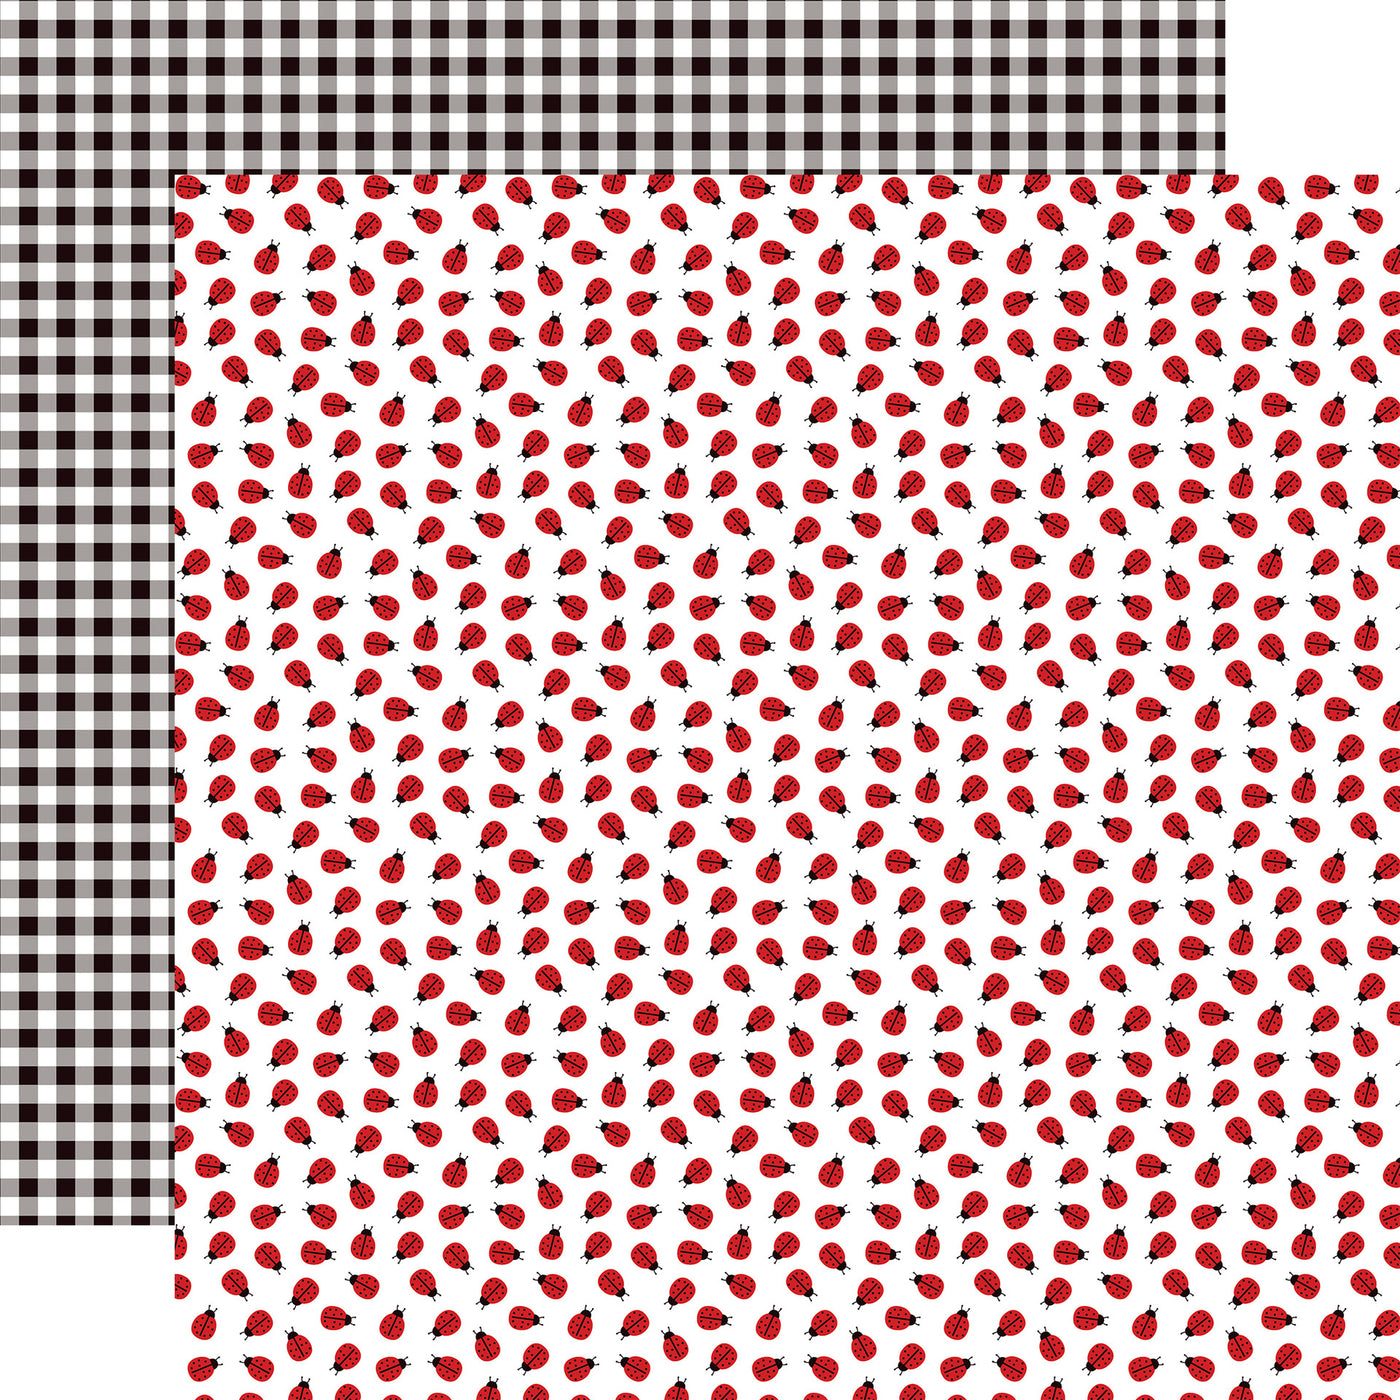 12x12 double-sided patterned paper. (Side A - red ladybugs all over on a white background; Side B - black and white gingham)